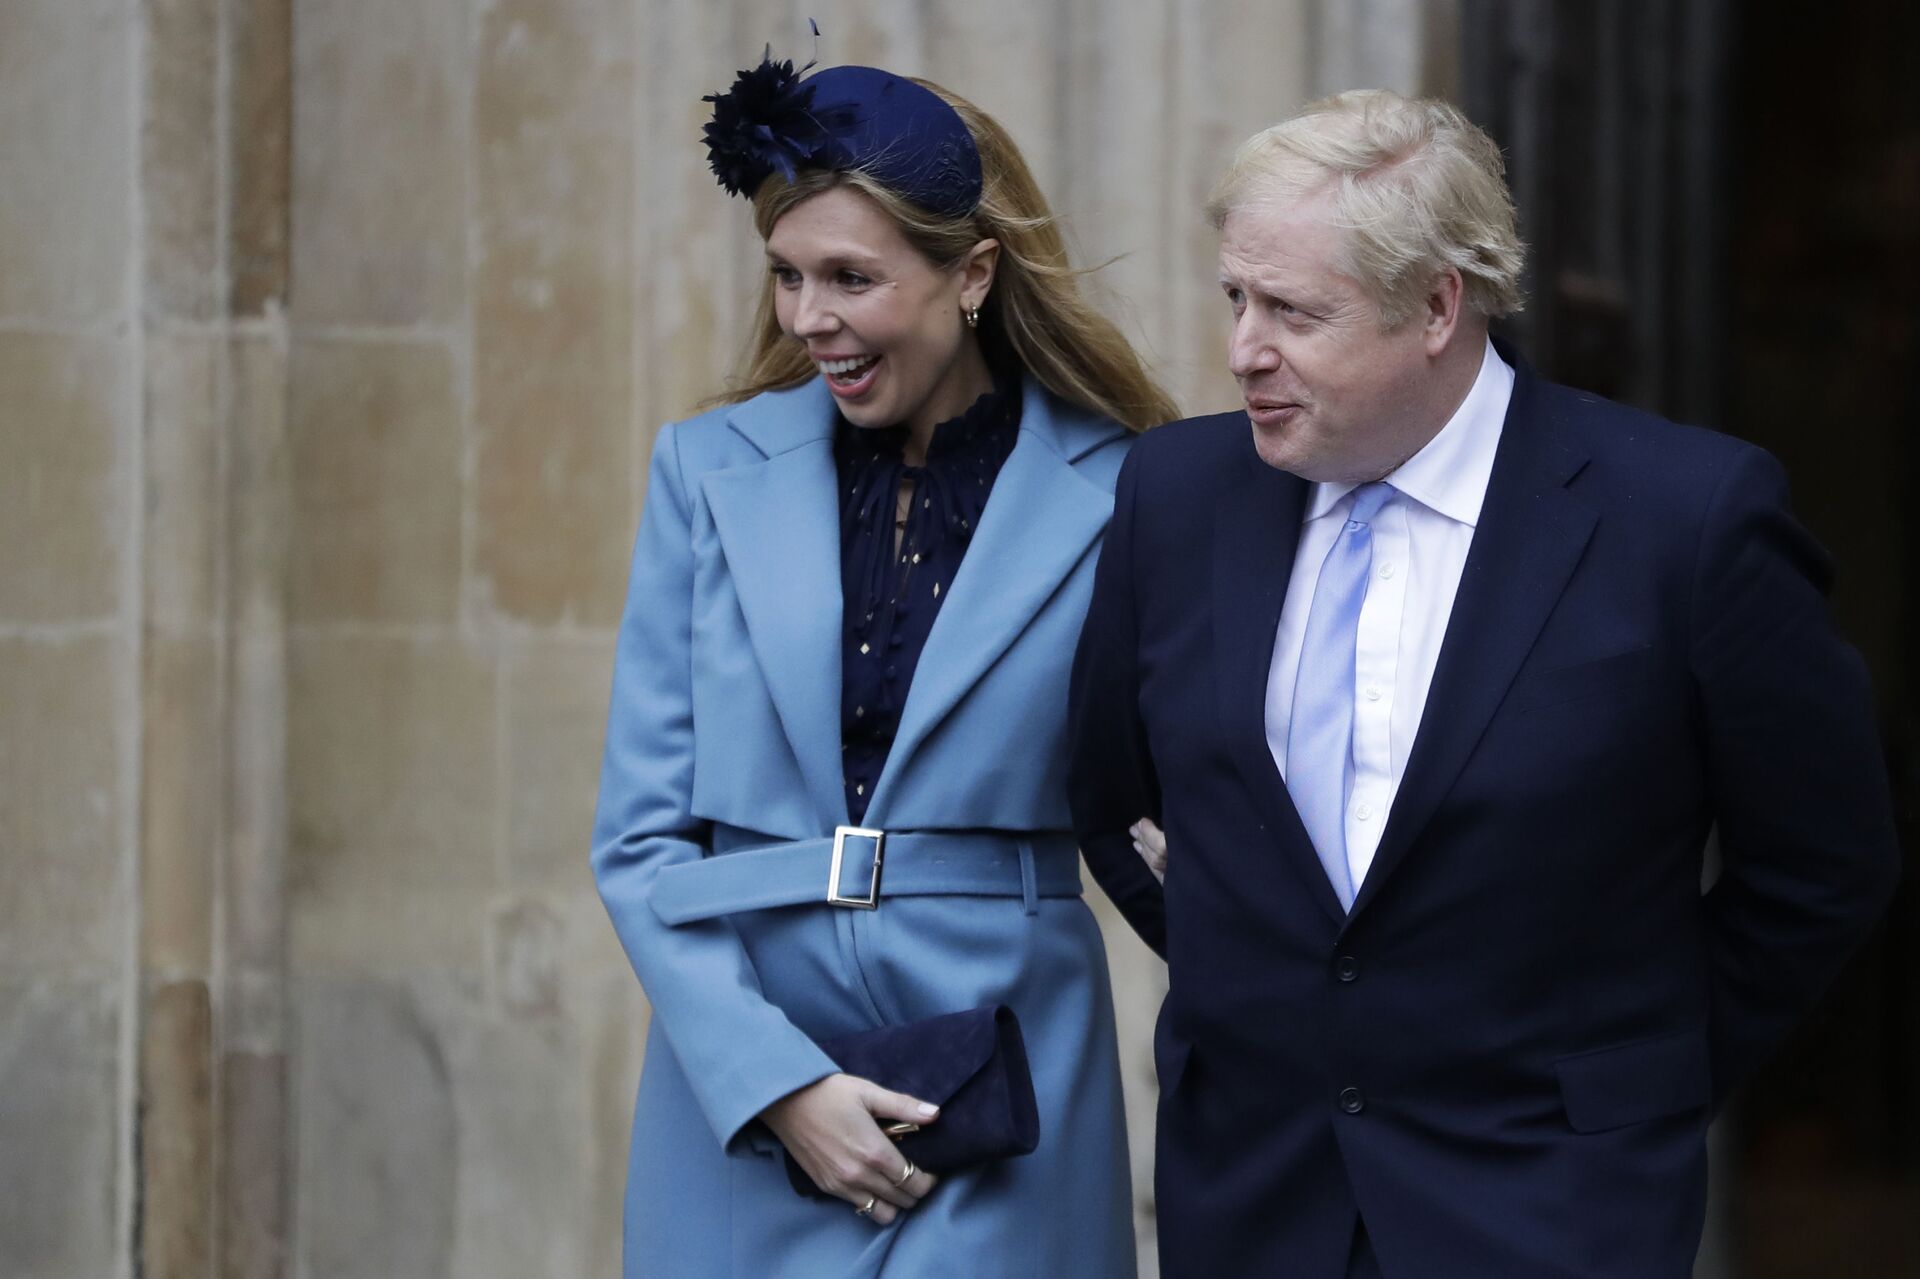 In this Monday, March 9, 2020 file photo Britain's Prime Minister Boris Johnson and his partner Carrie Symonds arrive to attend the annual Commonwealth Day service at Westminster Abbey in London.  Boris Johnson and his partner Carrie Symonds have announced she gave birth to a healthy baby boy at a London hospital earlier this morning” Wednesday April 29, 2020, and that both mother and baby are doing well - Sputnik International, 1920, 09.12.2021